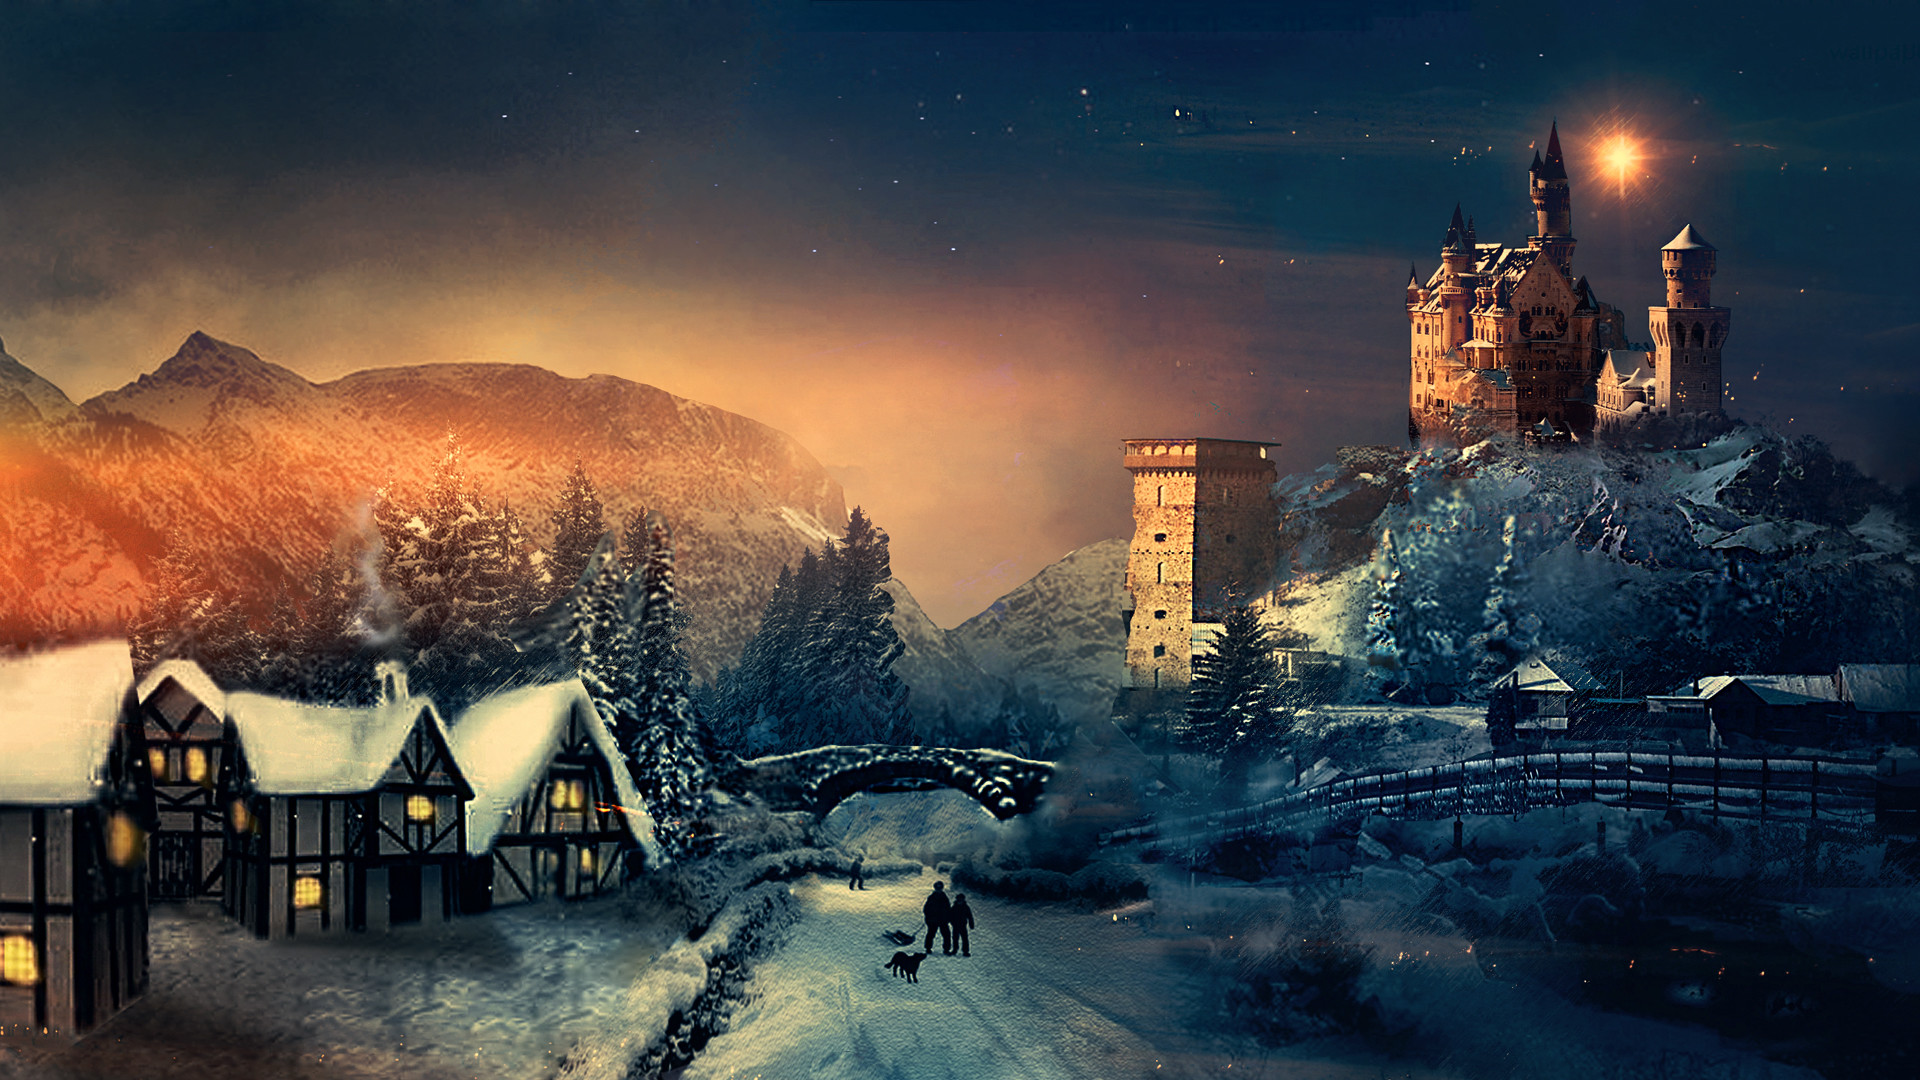 1920x1080 Author: Martina. Tags: Christmas Winter. Description: Download Christmas  Winter wallpaper from the above HD Widescreen ...